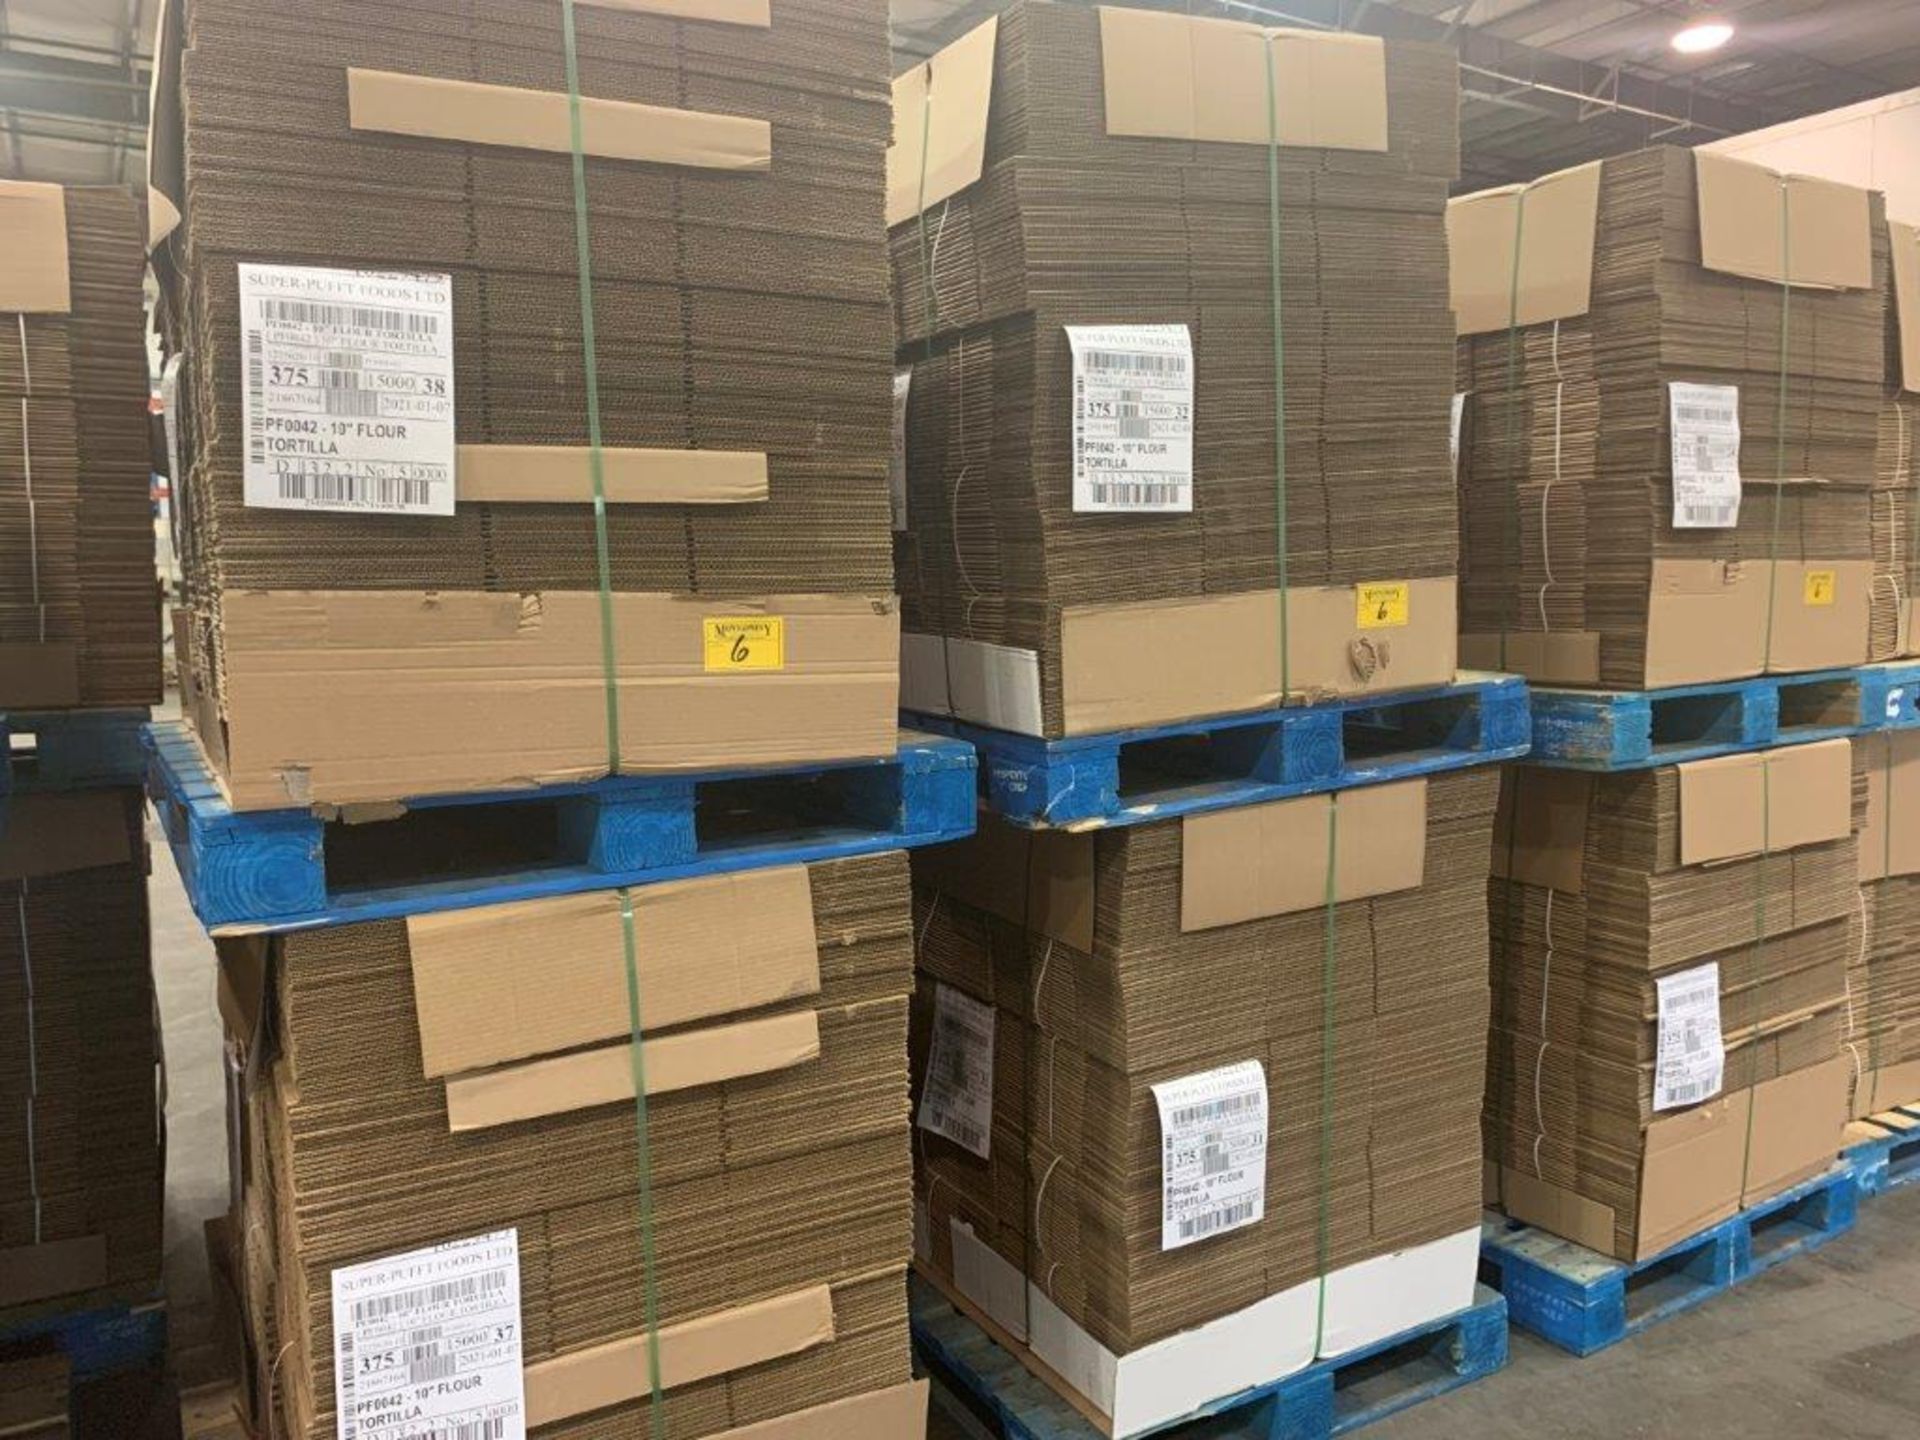 6 PALLETS PF0042 CORRIGATED CARDBOARD BOXES 375X6 - 2250 BOXES APPROX 20X11X5 1/2 INCHES